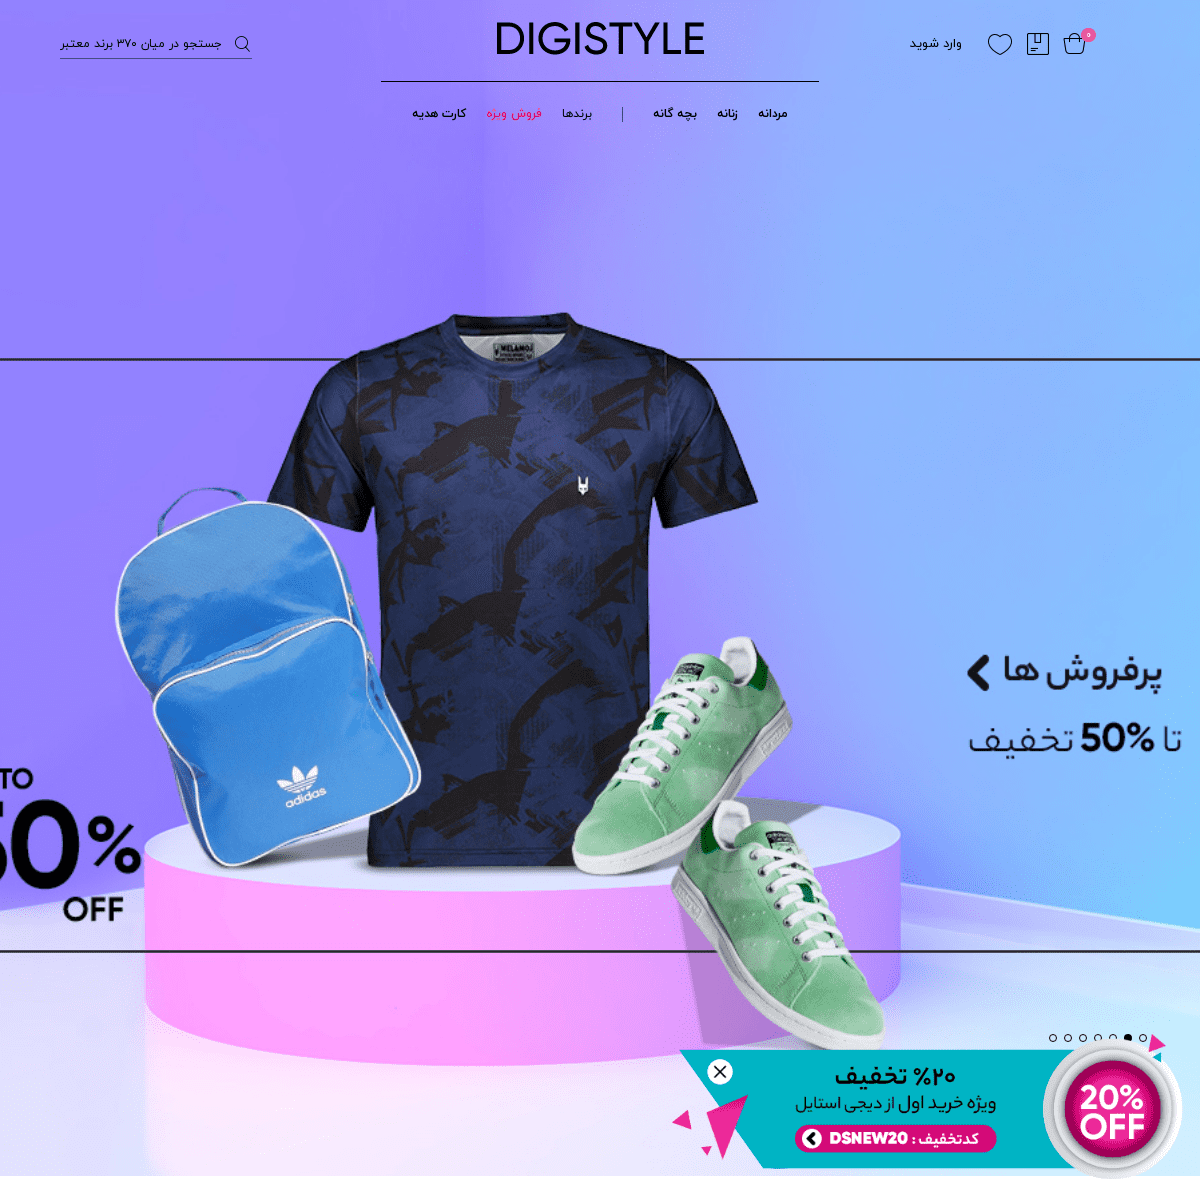 A complete backup of digistyle.com